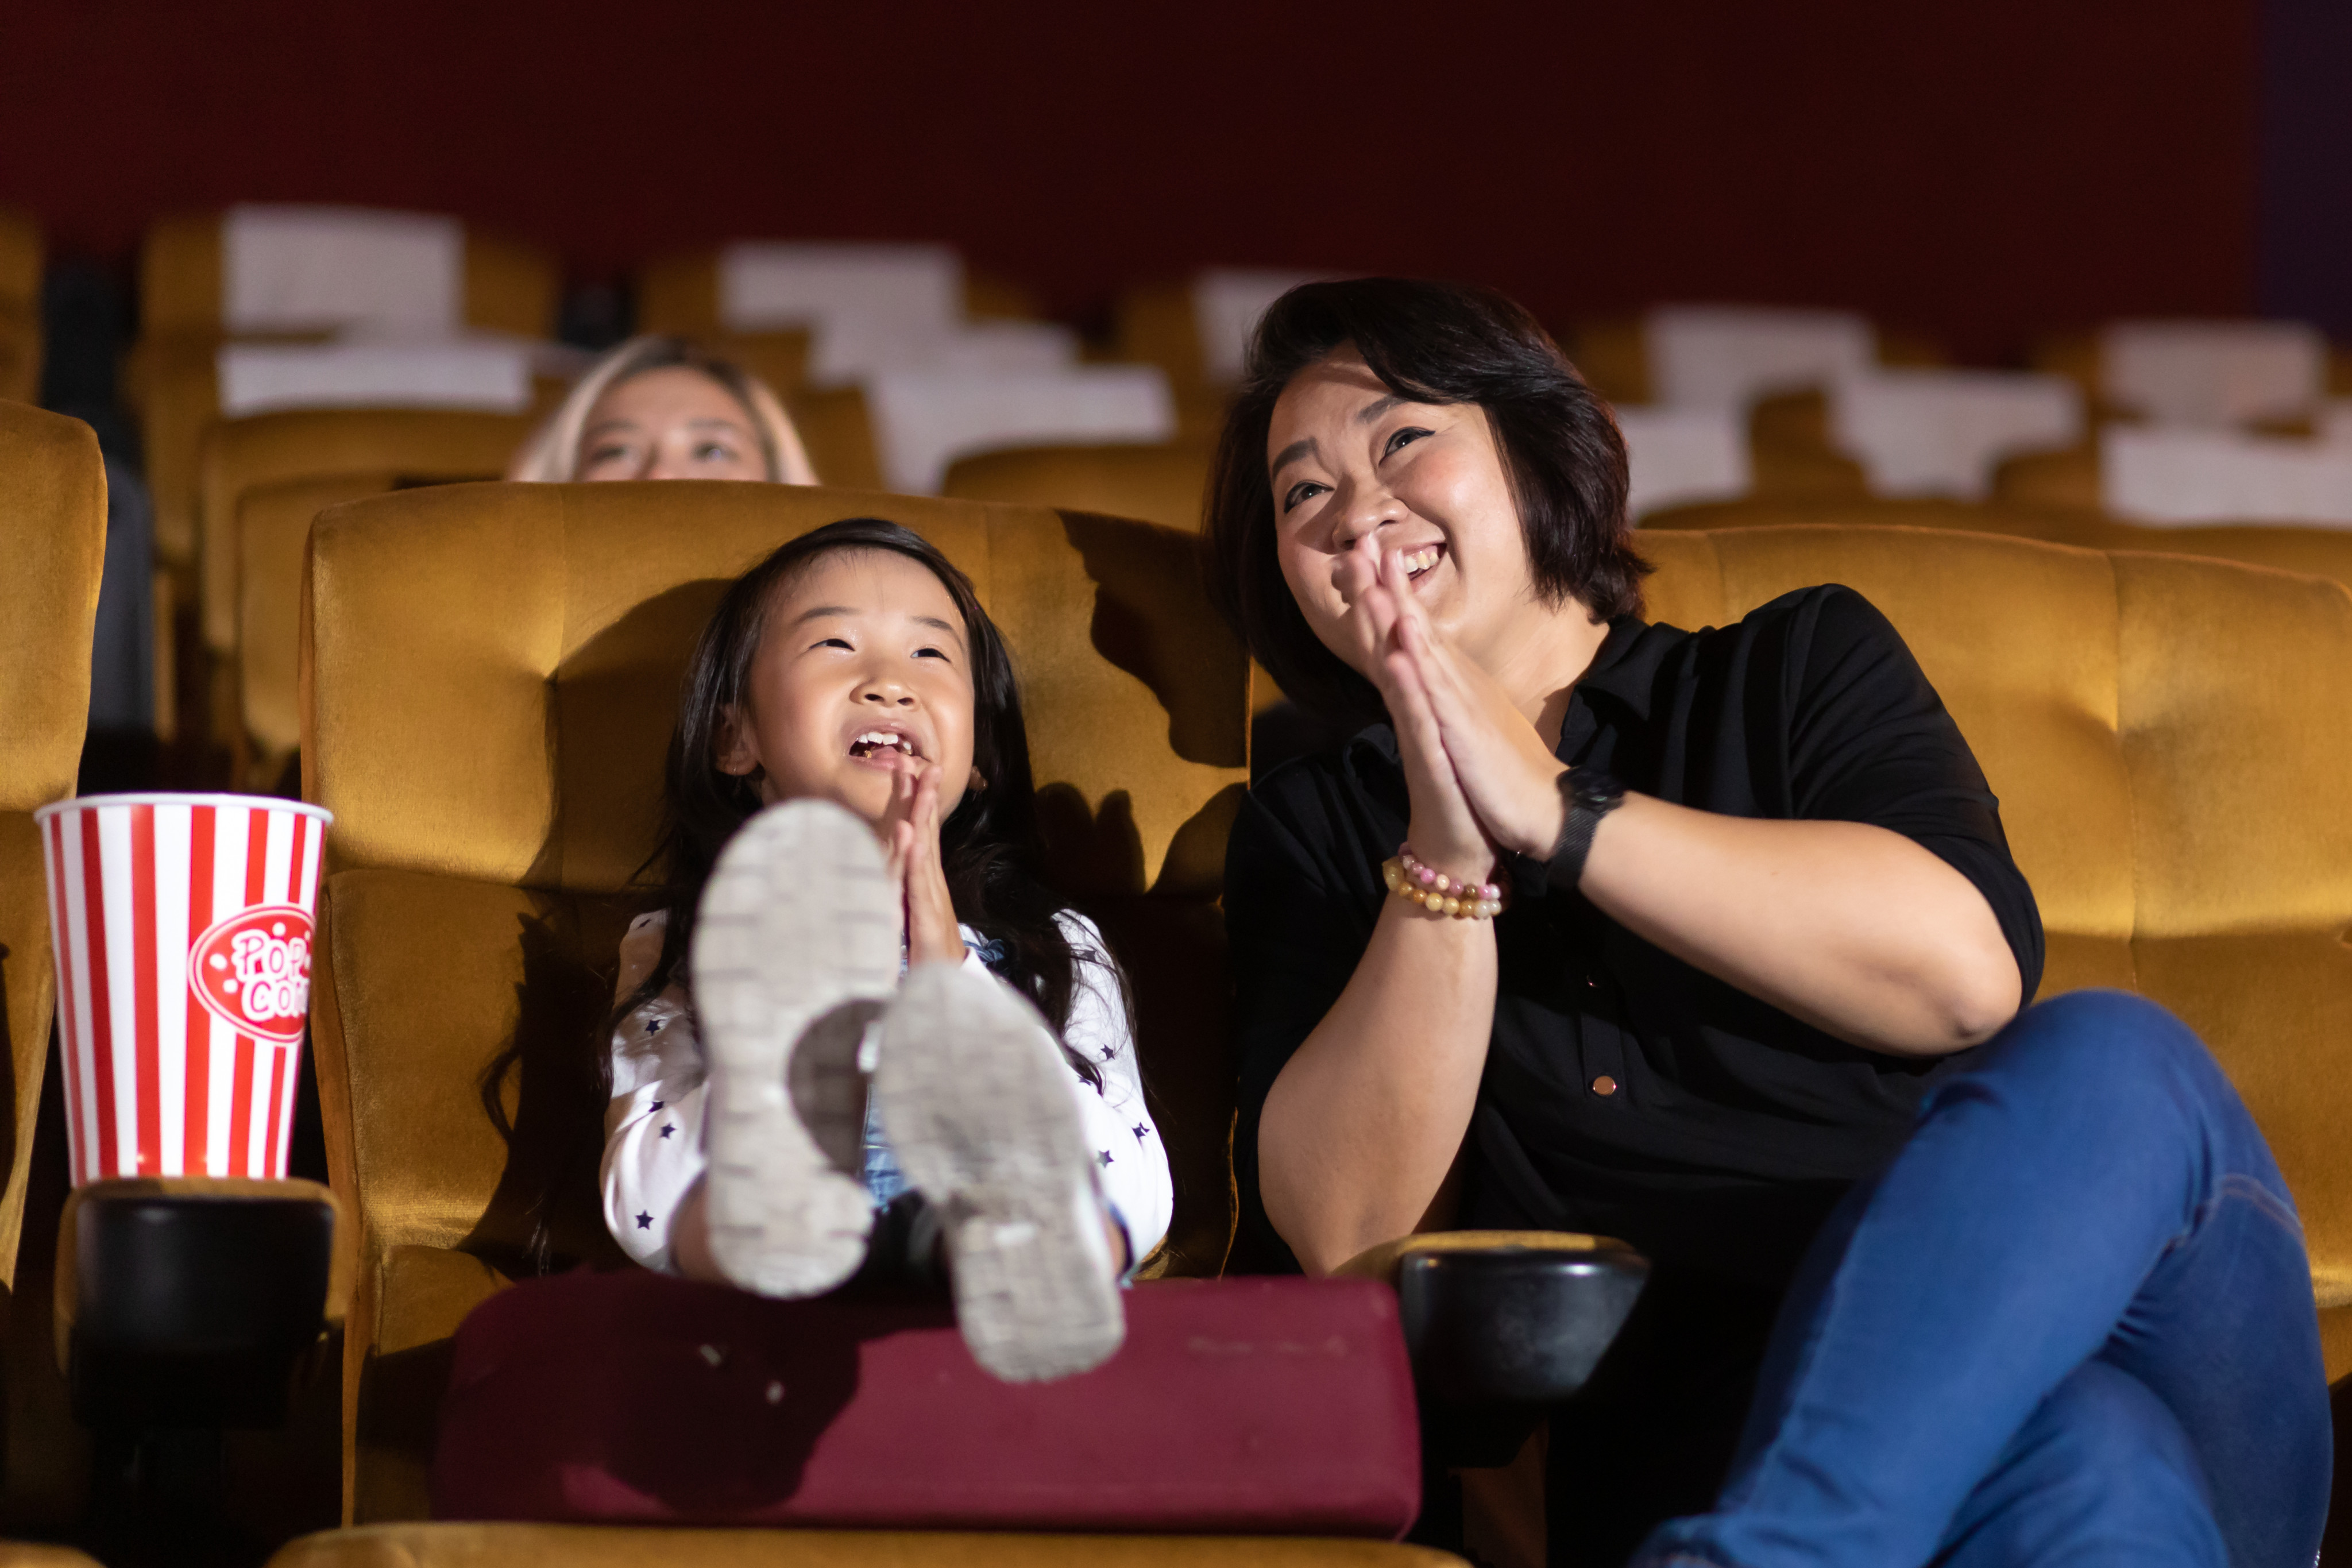 China’s “golden week” holiday (September 29 to October 6) is adding to what was a record-setting summer box-office haul. Photo: Shutterstock